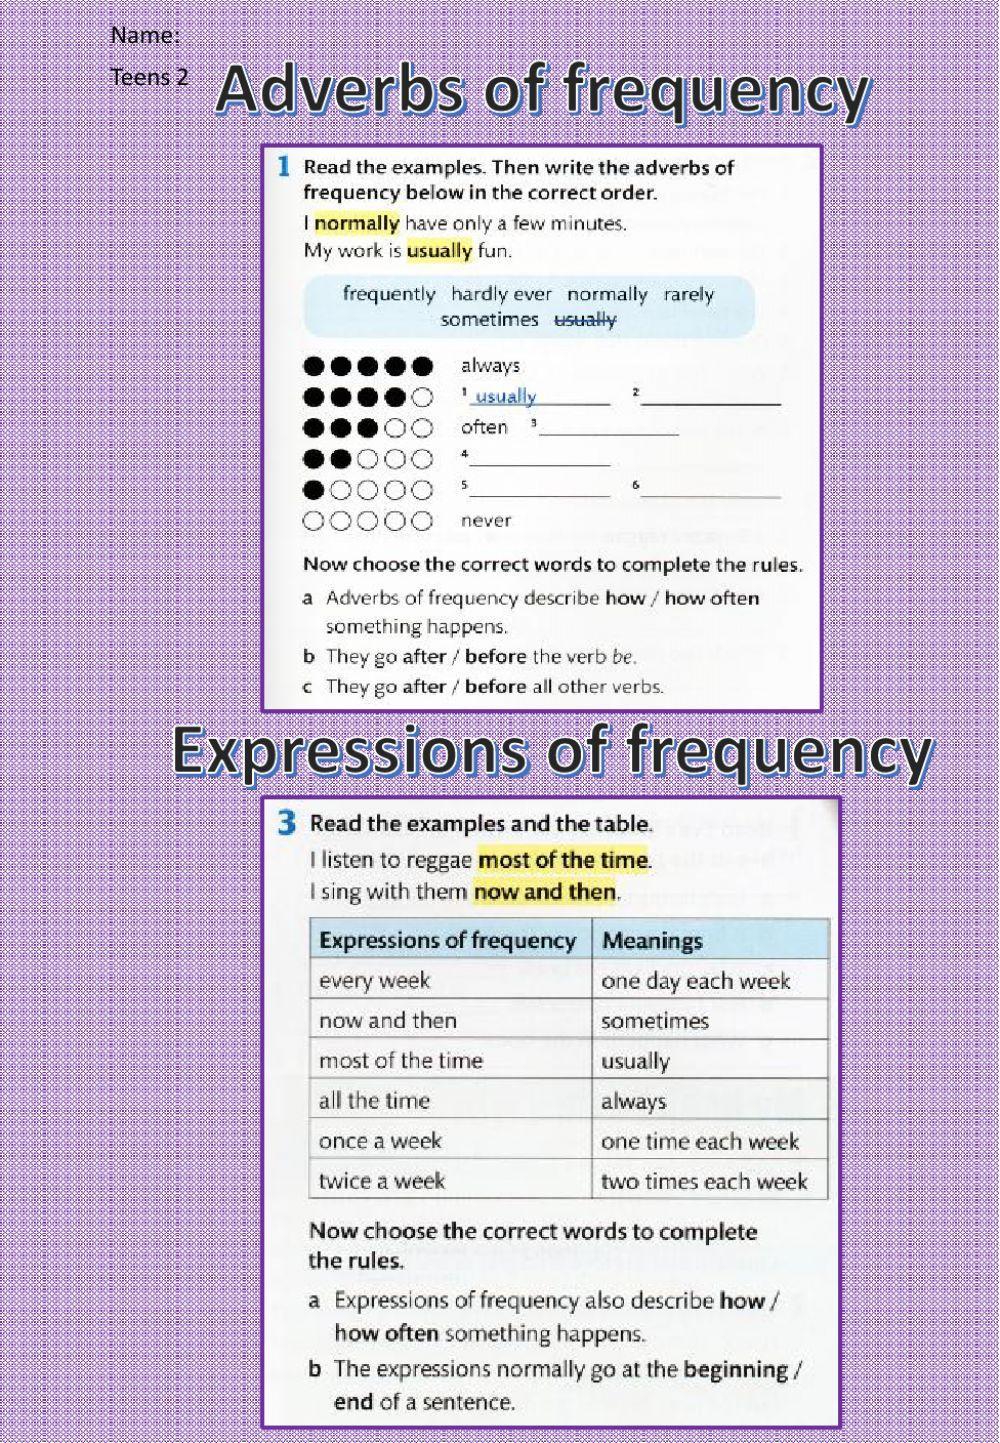 Adverbs and expressions of frequency